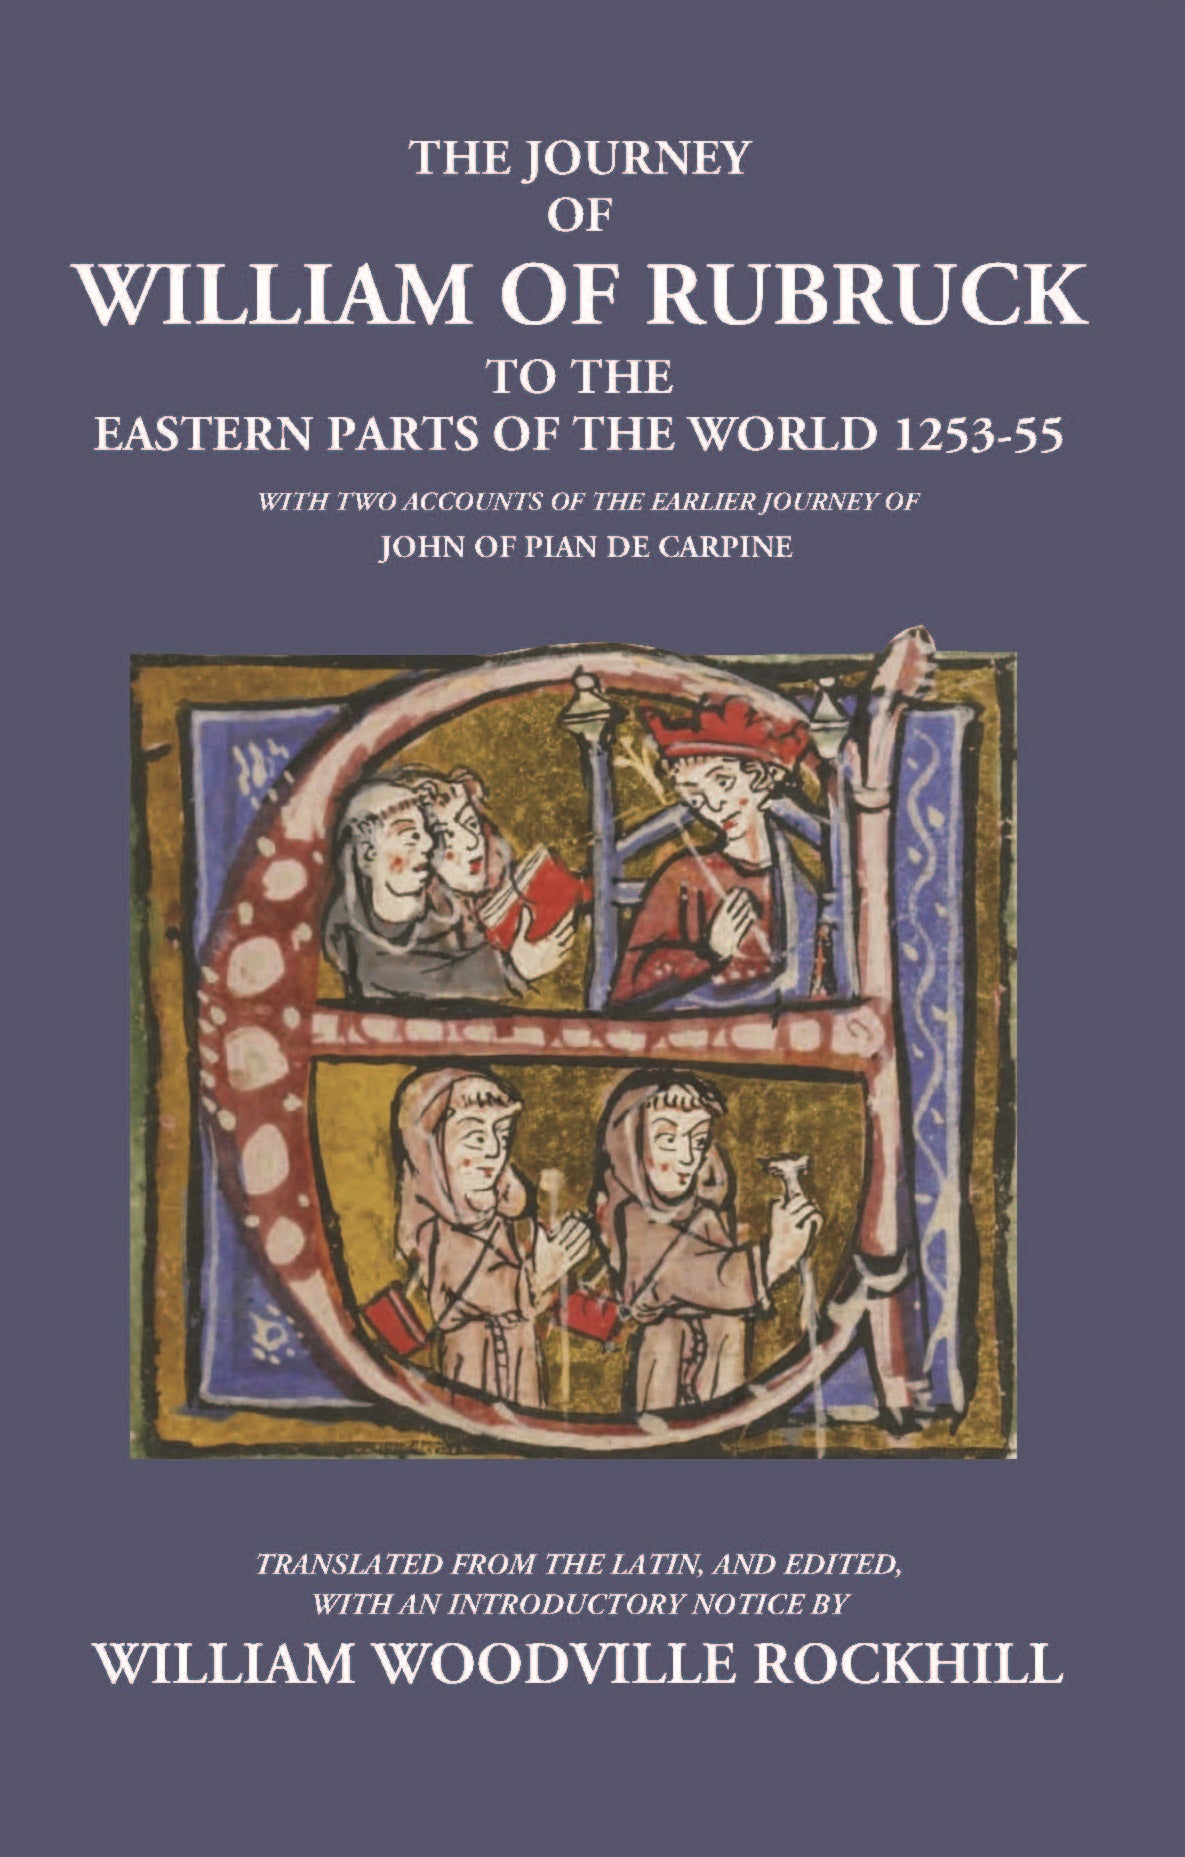 The Journey Of William Of Rubruck To The Eastern Parts Of The World 1253-55